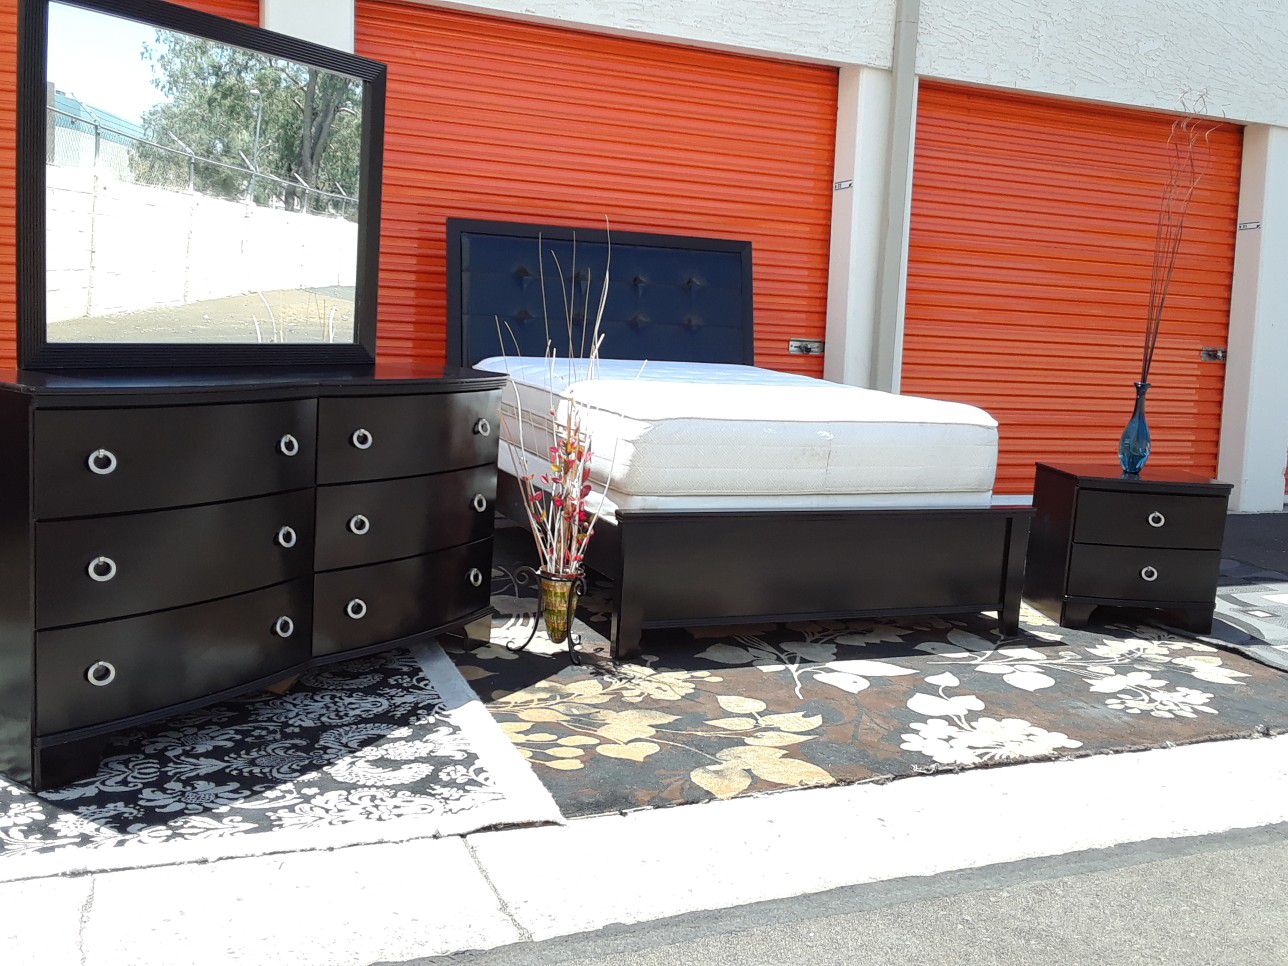 Queen-size dark expresso bedroom set with mattress box spring everything you see included